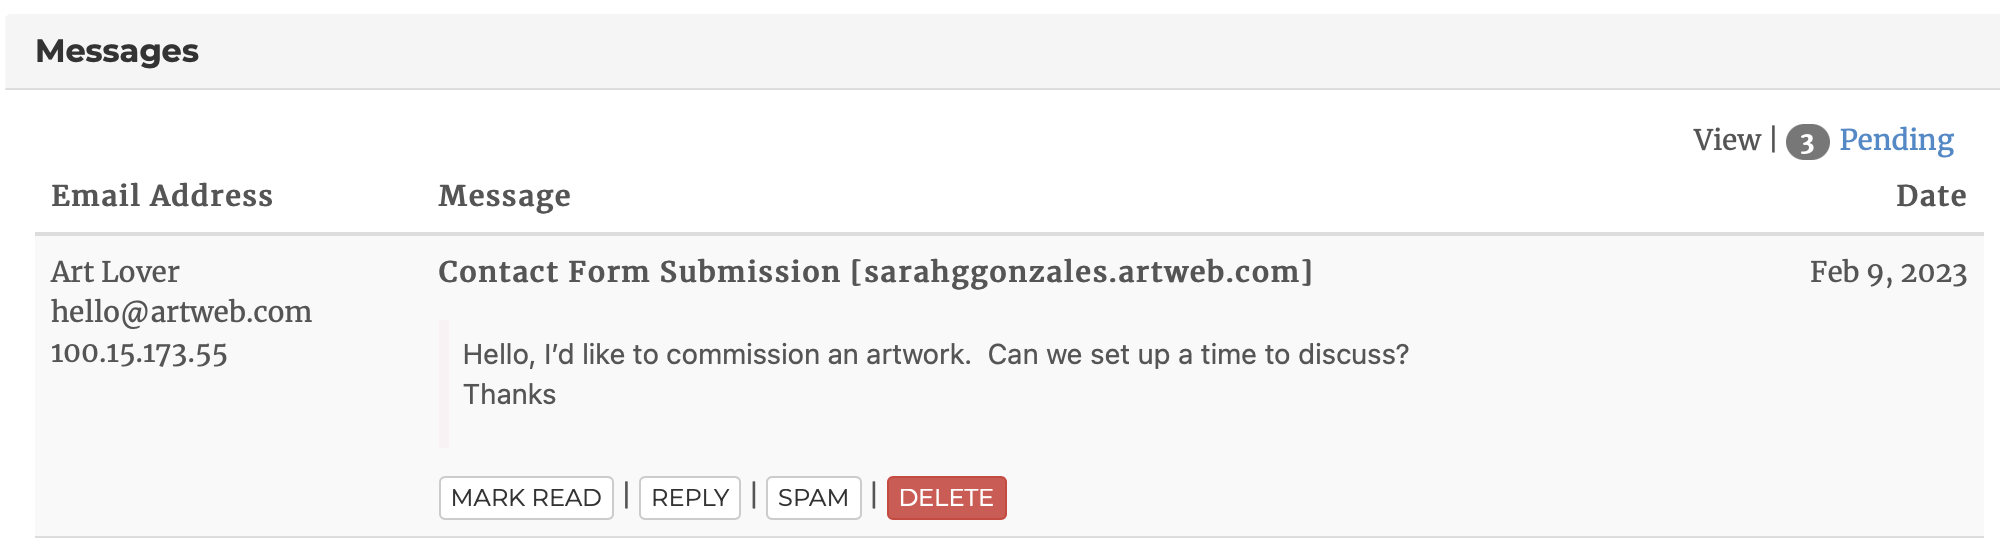 Contact Form Submission in Artweb control panel